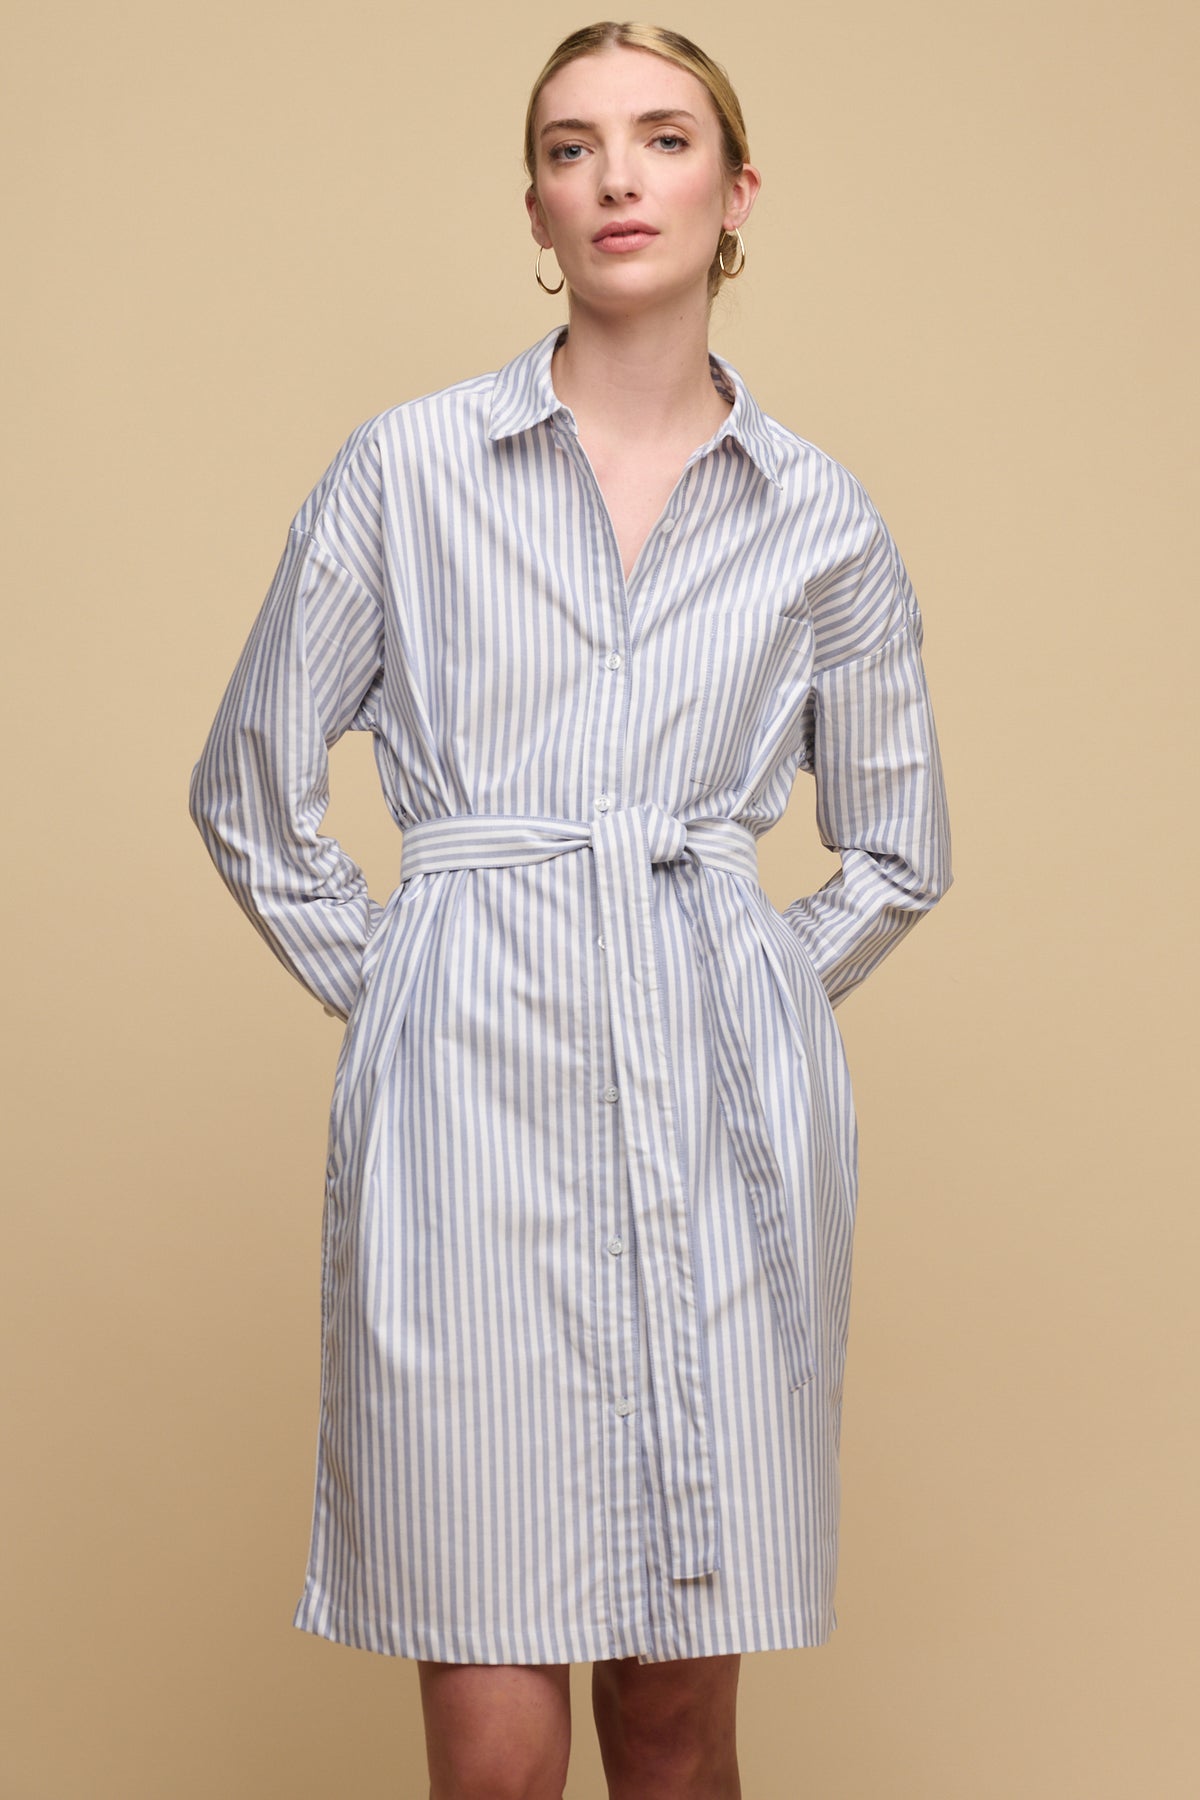 
            Thigh up image of white female with blonde hair tied back wearing belted midi cotton shirt dress in white blue stripes